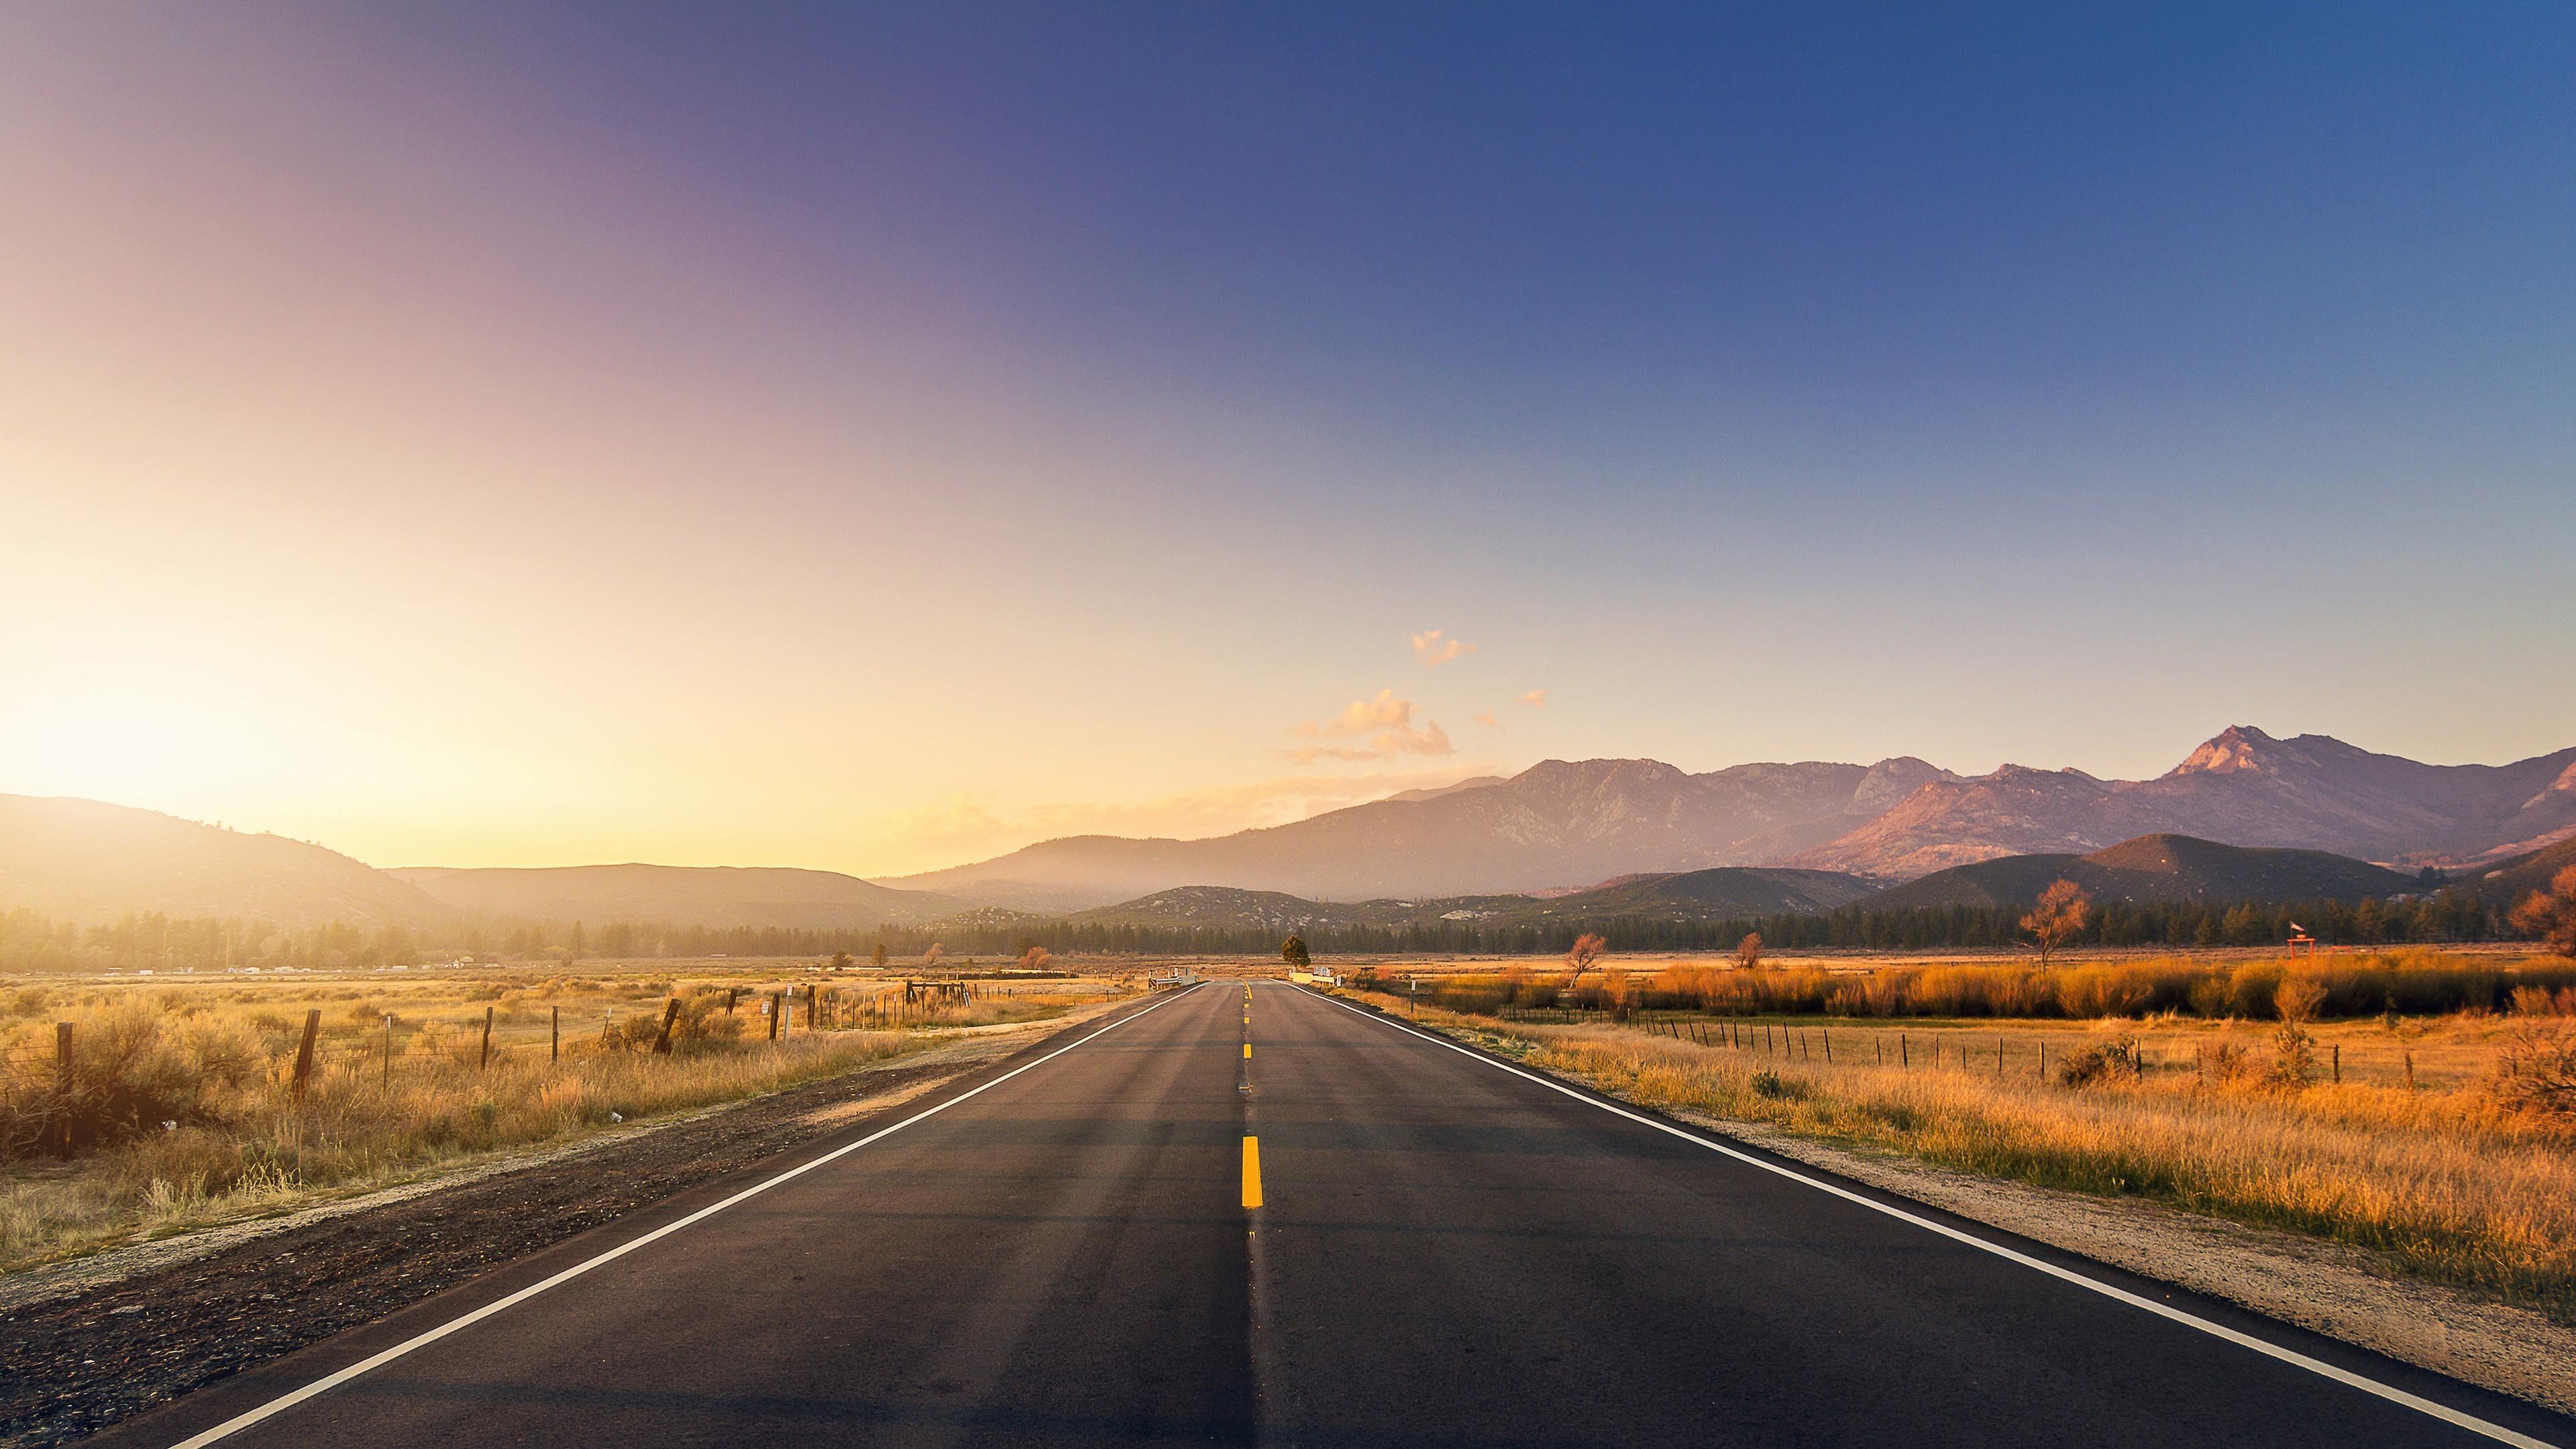 Road With Sunset And Mountains Wallpaper. Wallpaper Studio 10